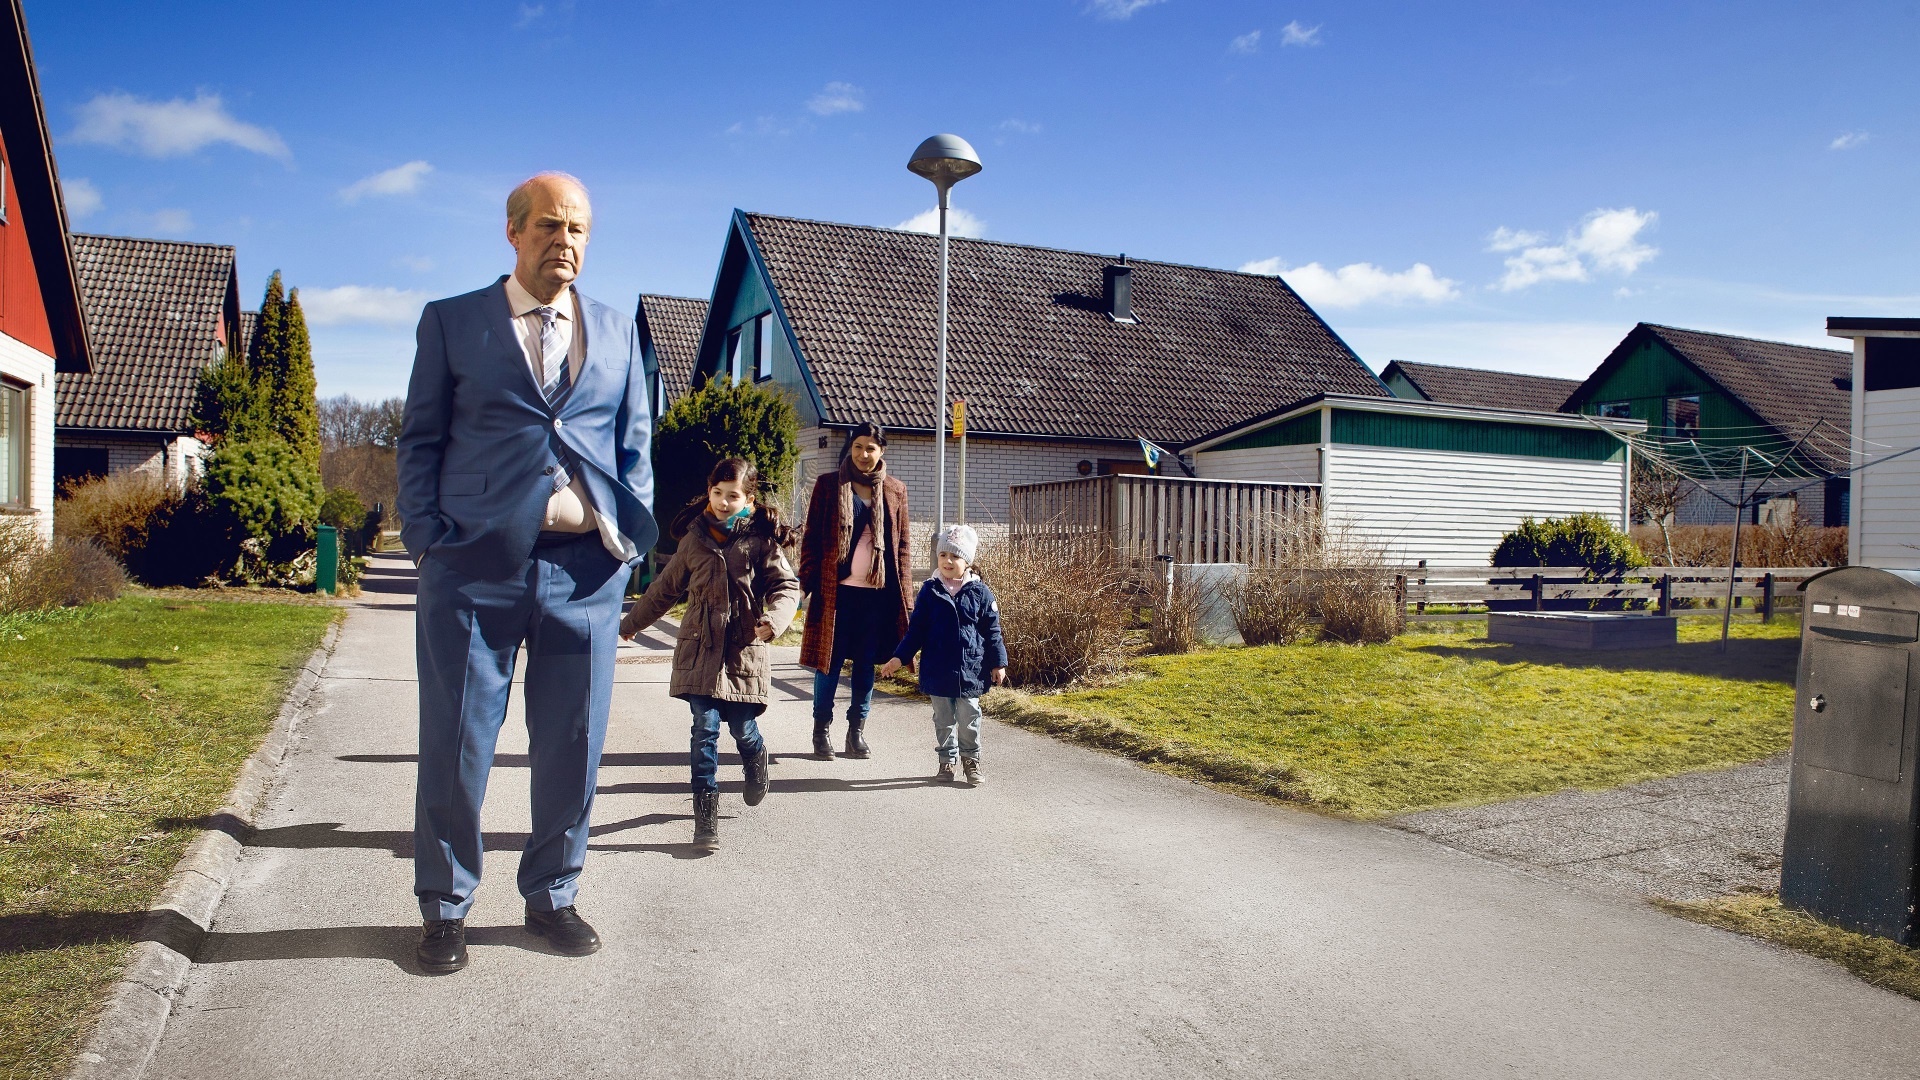 A Man Called Ove, Grumpy old man, Unexpected relationships, Heartwarming story, 1920x1080 Full HD Desktop